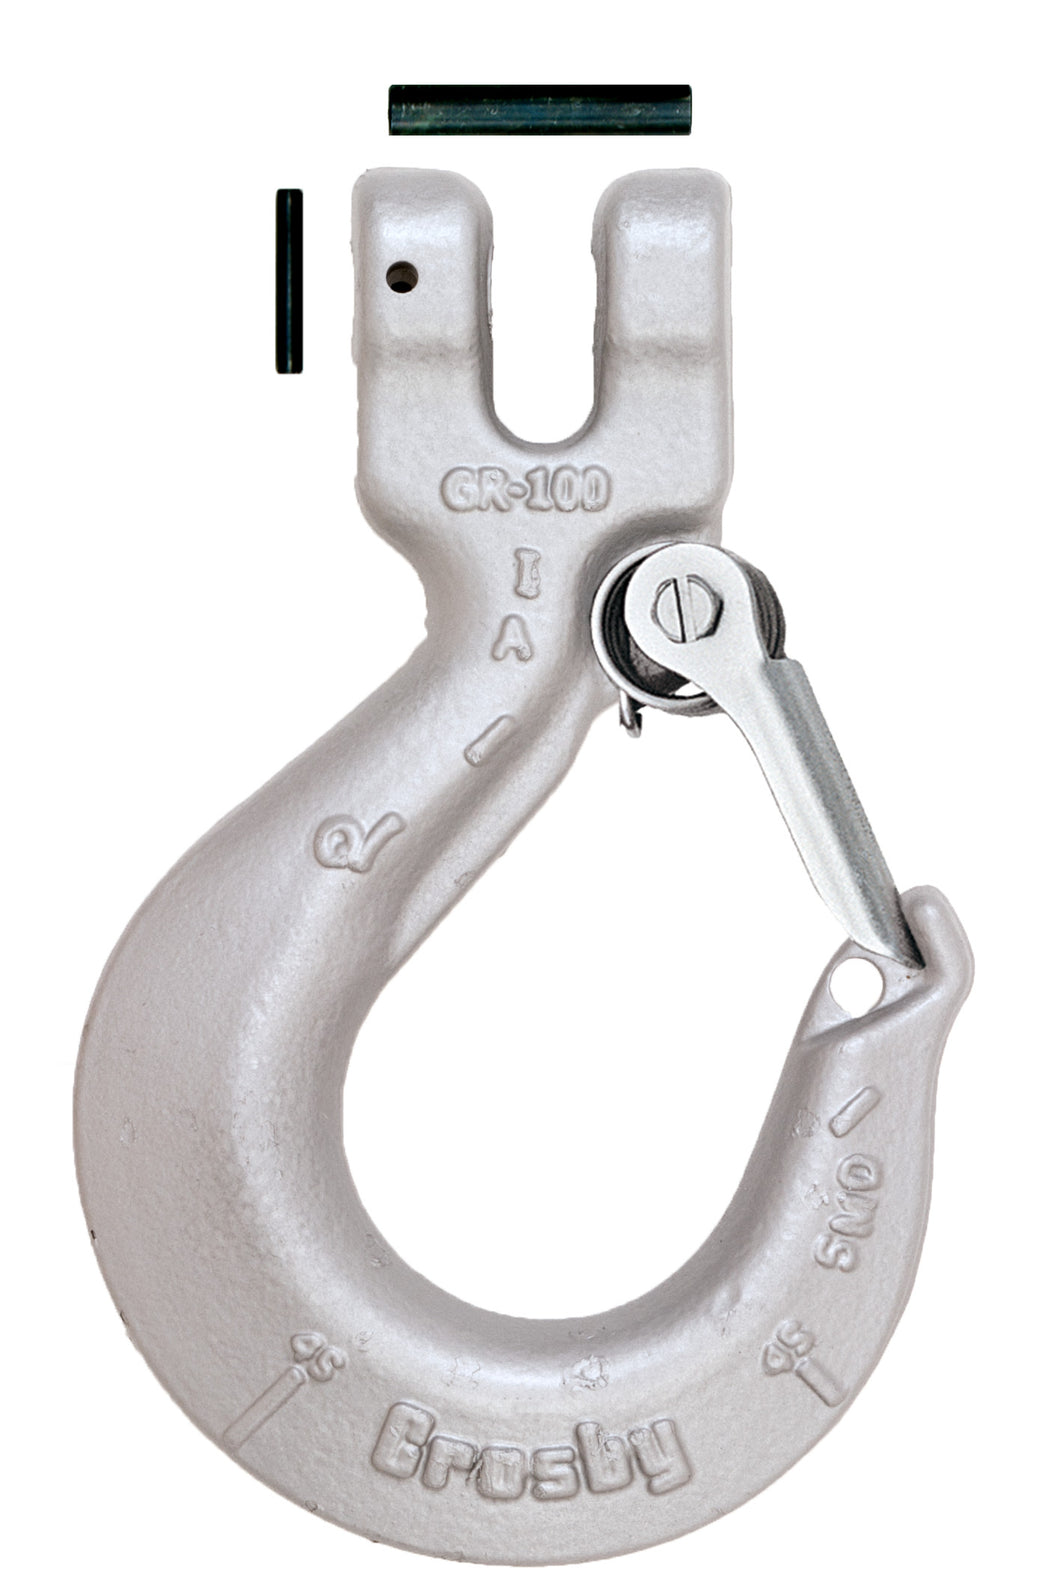 6mm L-1339 Clevis Sling Hook with Latch